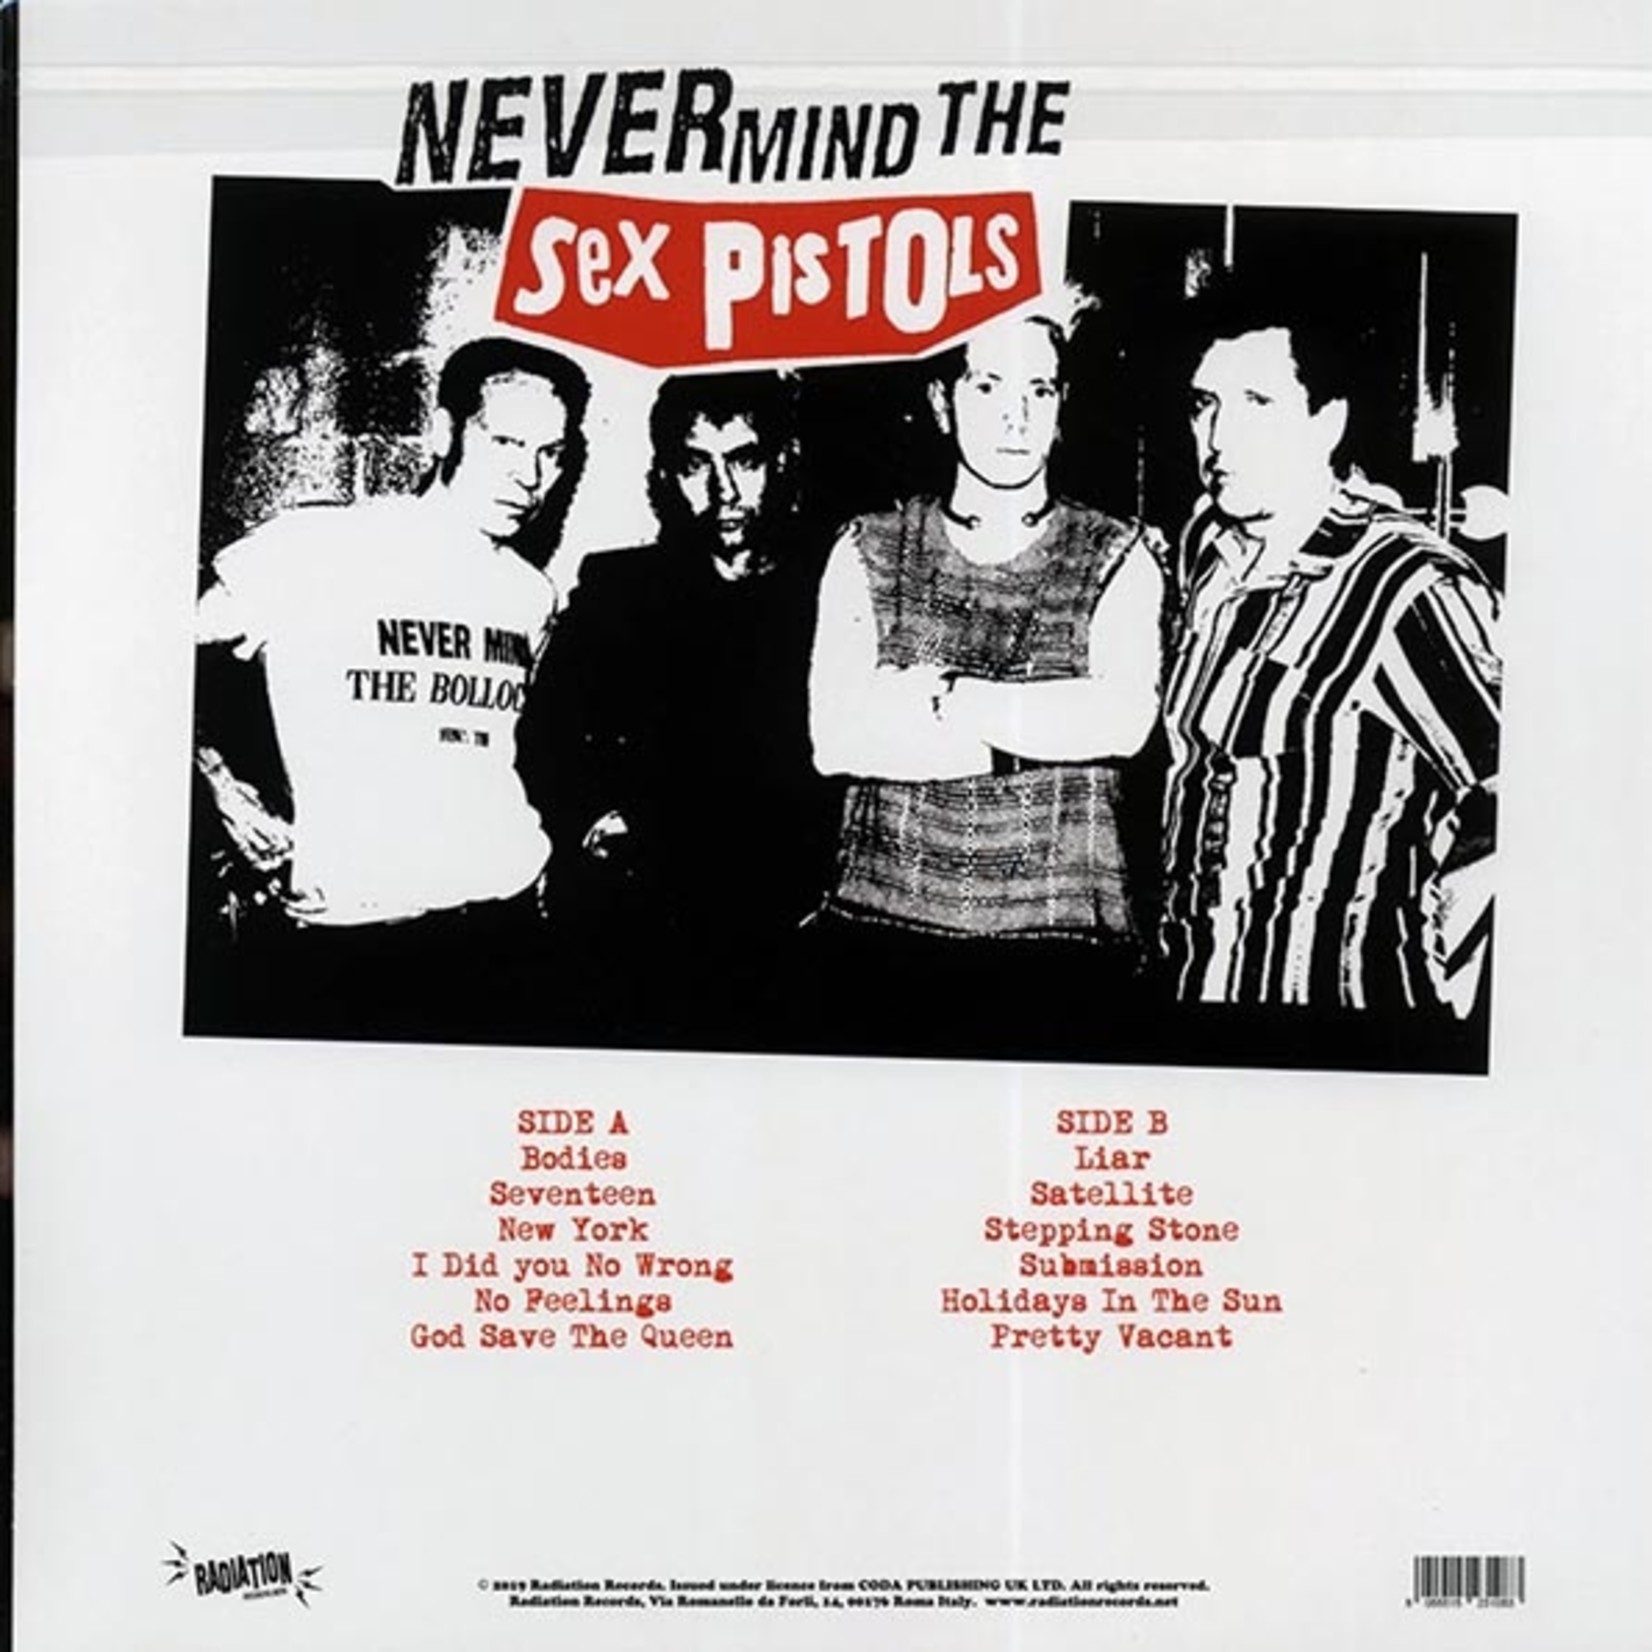 The Sex Pistols - Never Mind The Sex Pistols: Here Comes The Filthy Lucre, Live At Stadio Olimpico, Roma, Italy July 10th 1996 (Radiation)